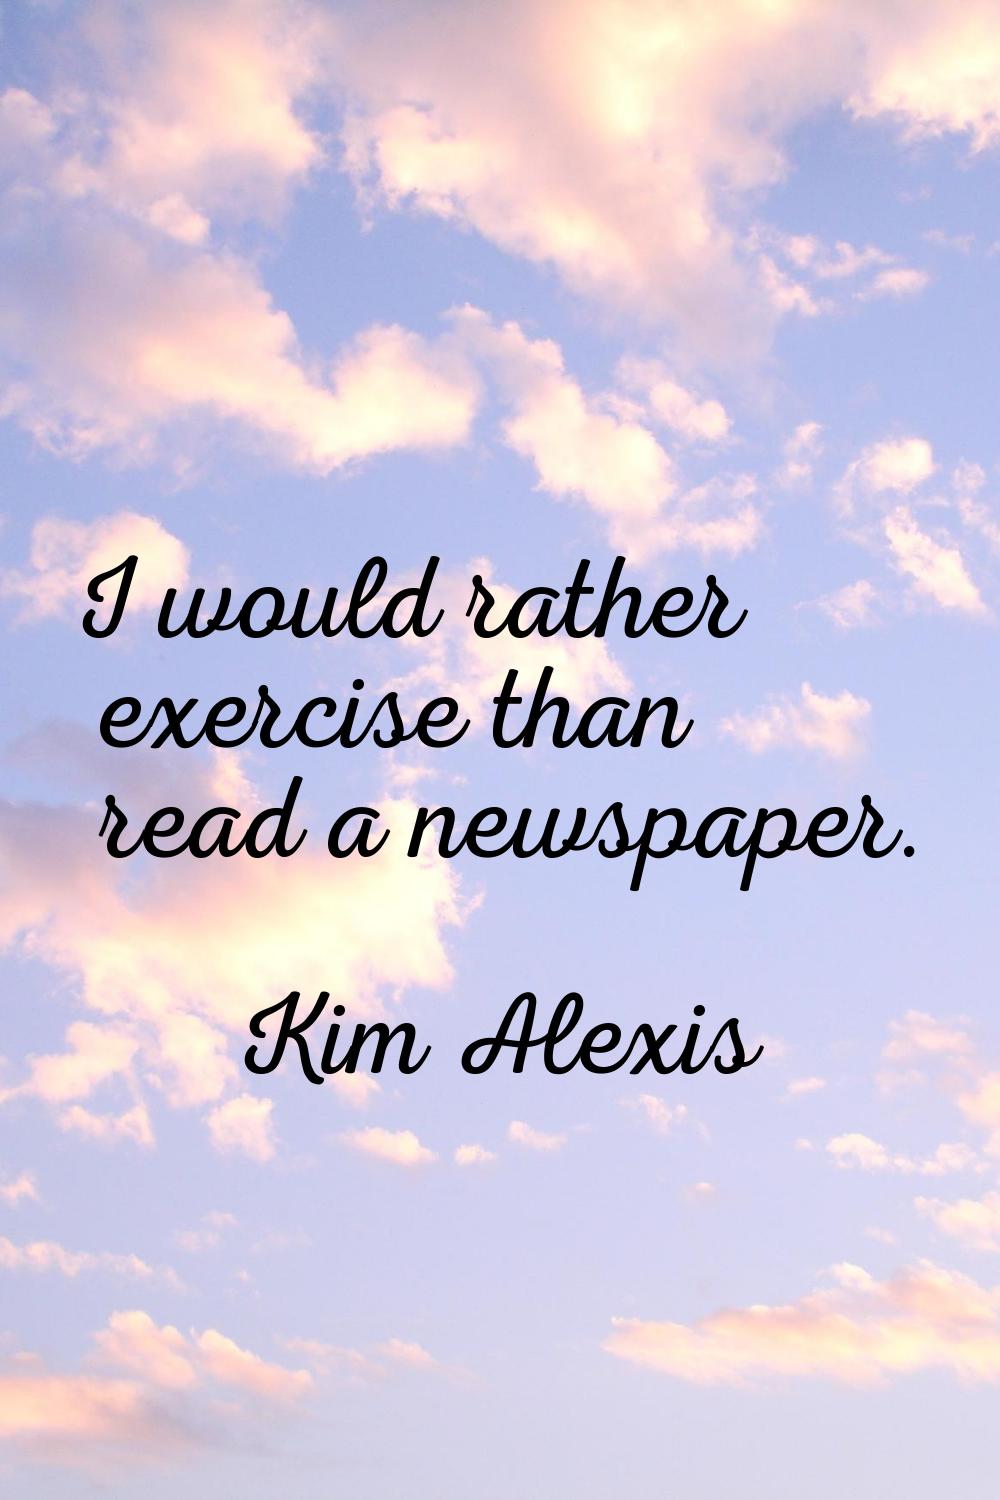 I would rather exercise than read a newspaper.